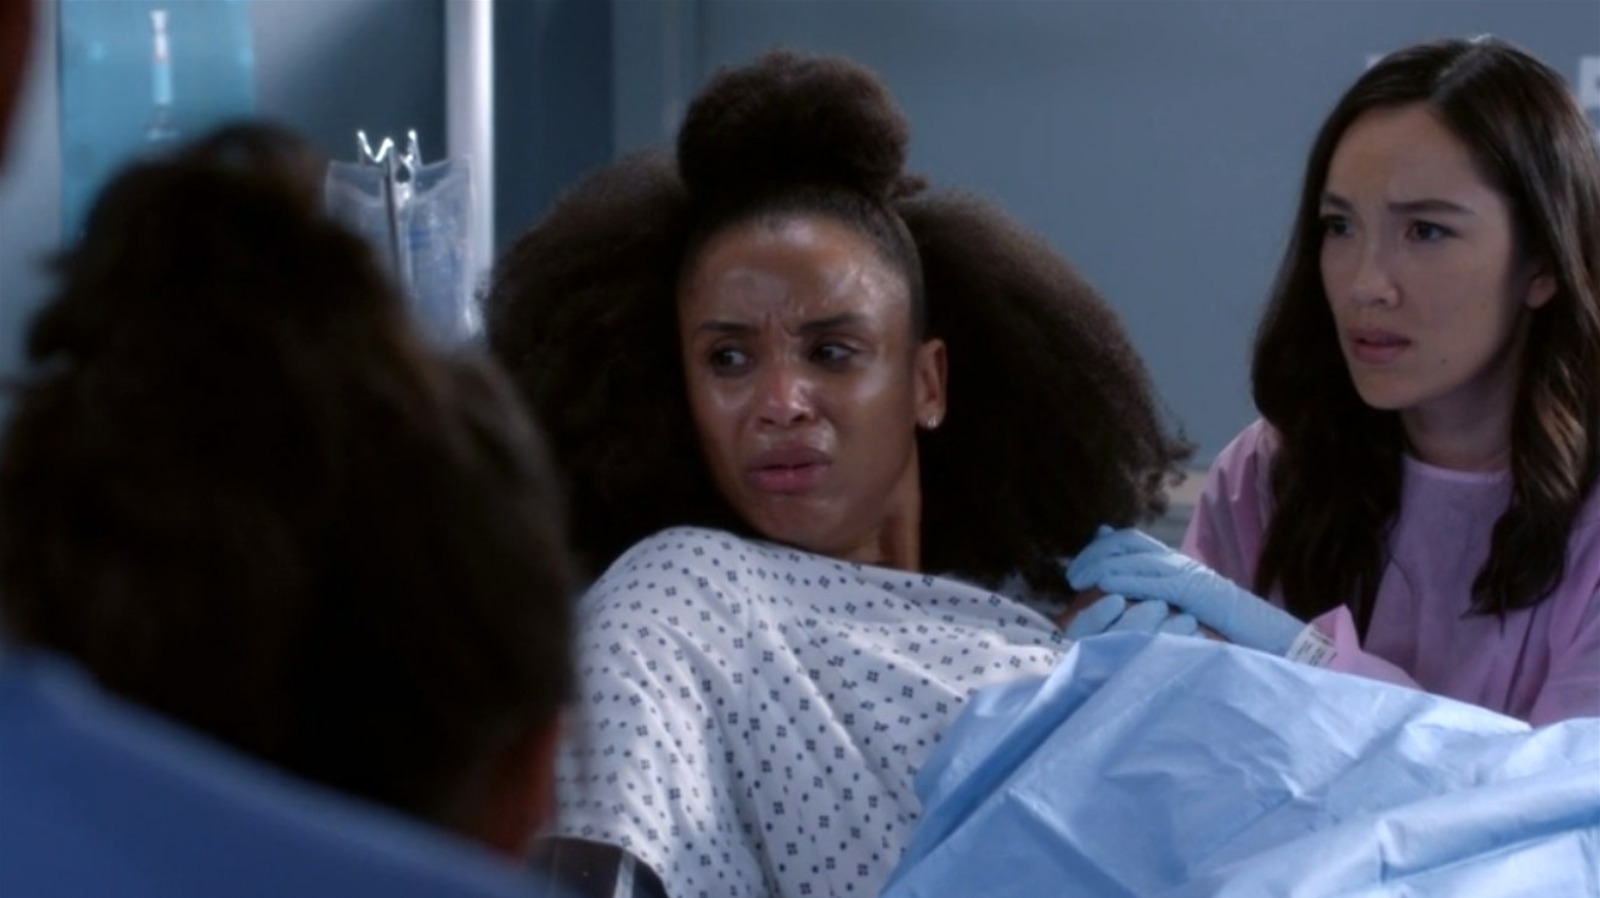 Grey S Anatomy S19 S Lion King Scene Is Giving Fans Musical Episode Flashbacks